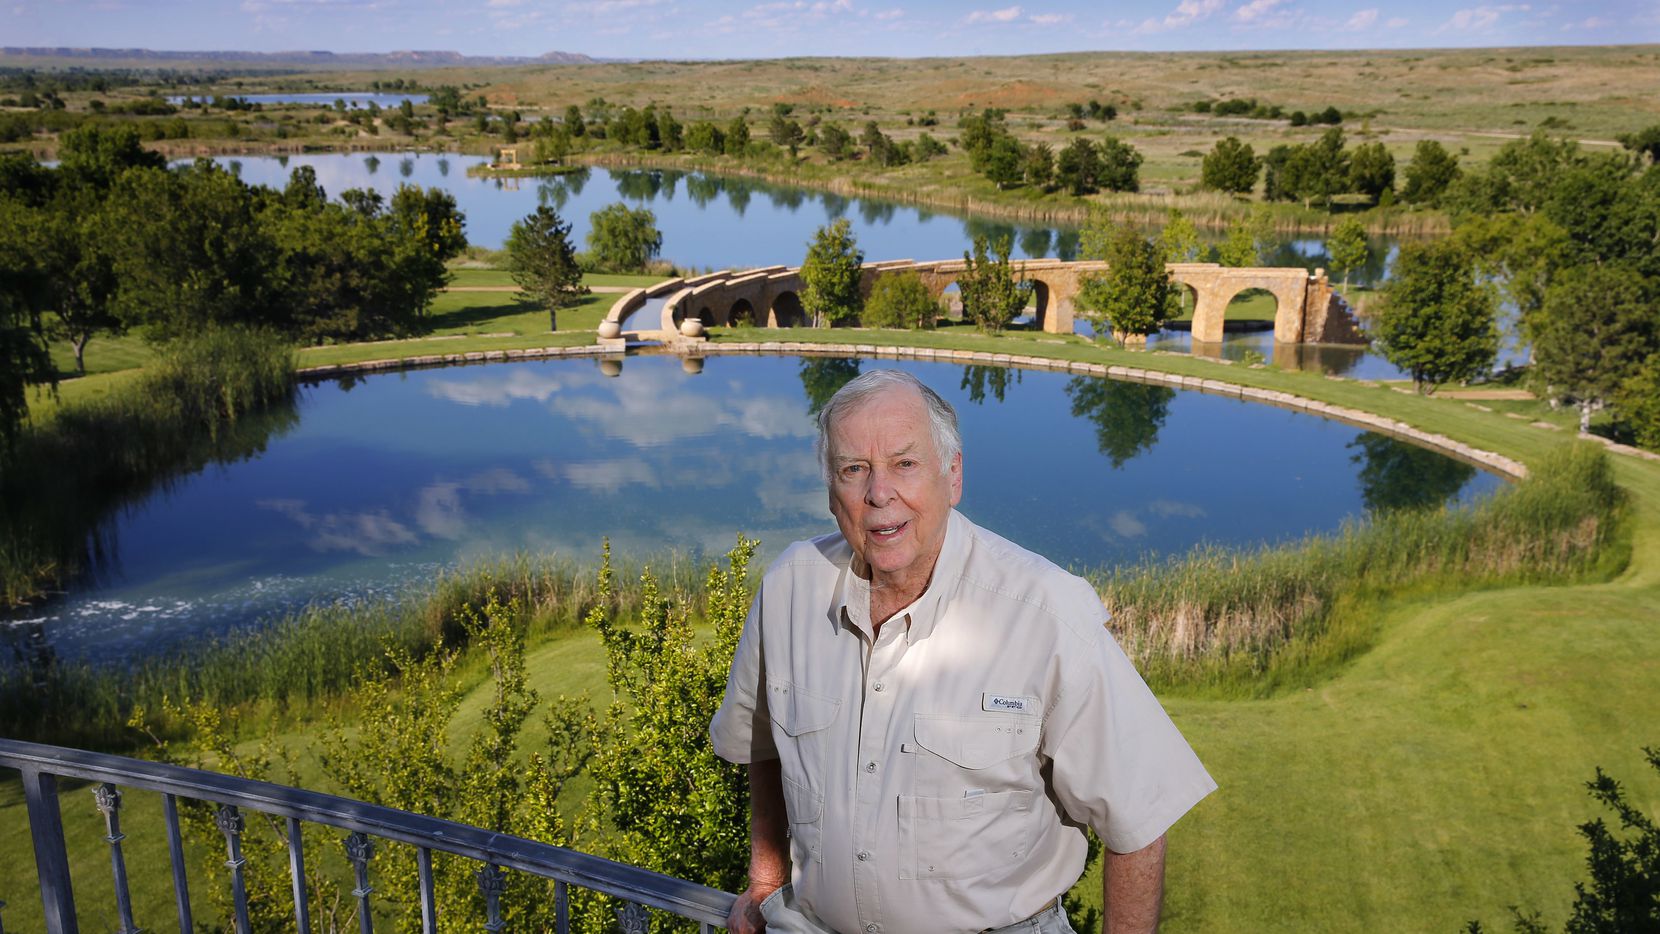 Oil tycoon T. Boone Pickens at his Mesa Vista Ranch in 2017.